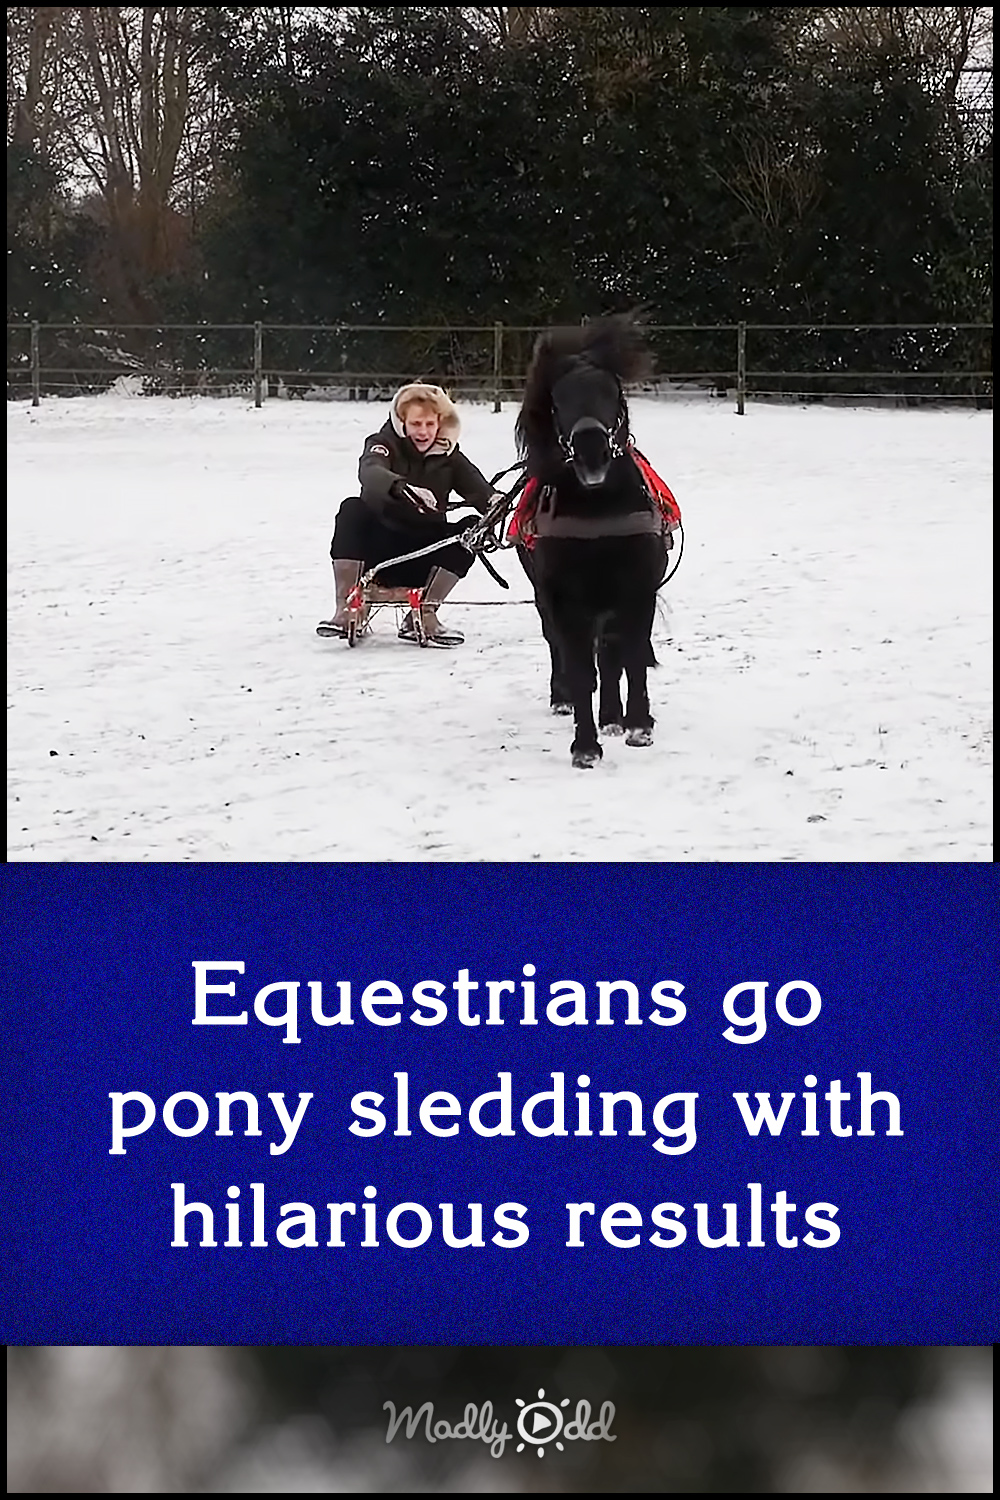 Equestrians go pony sledding with hilarious results